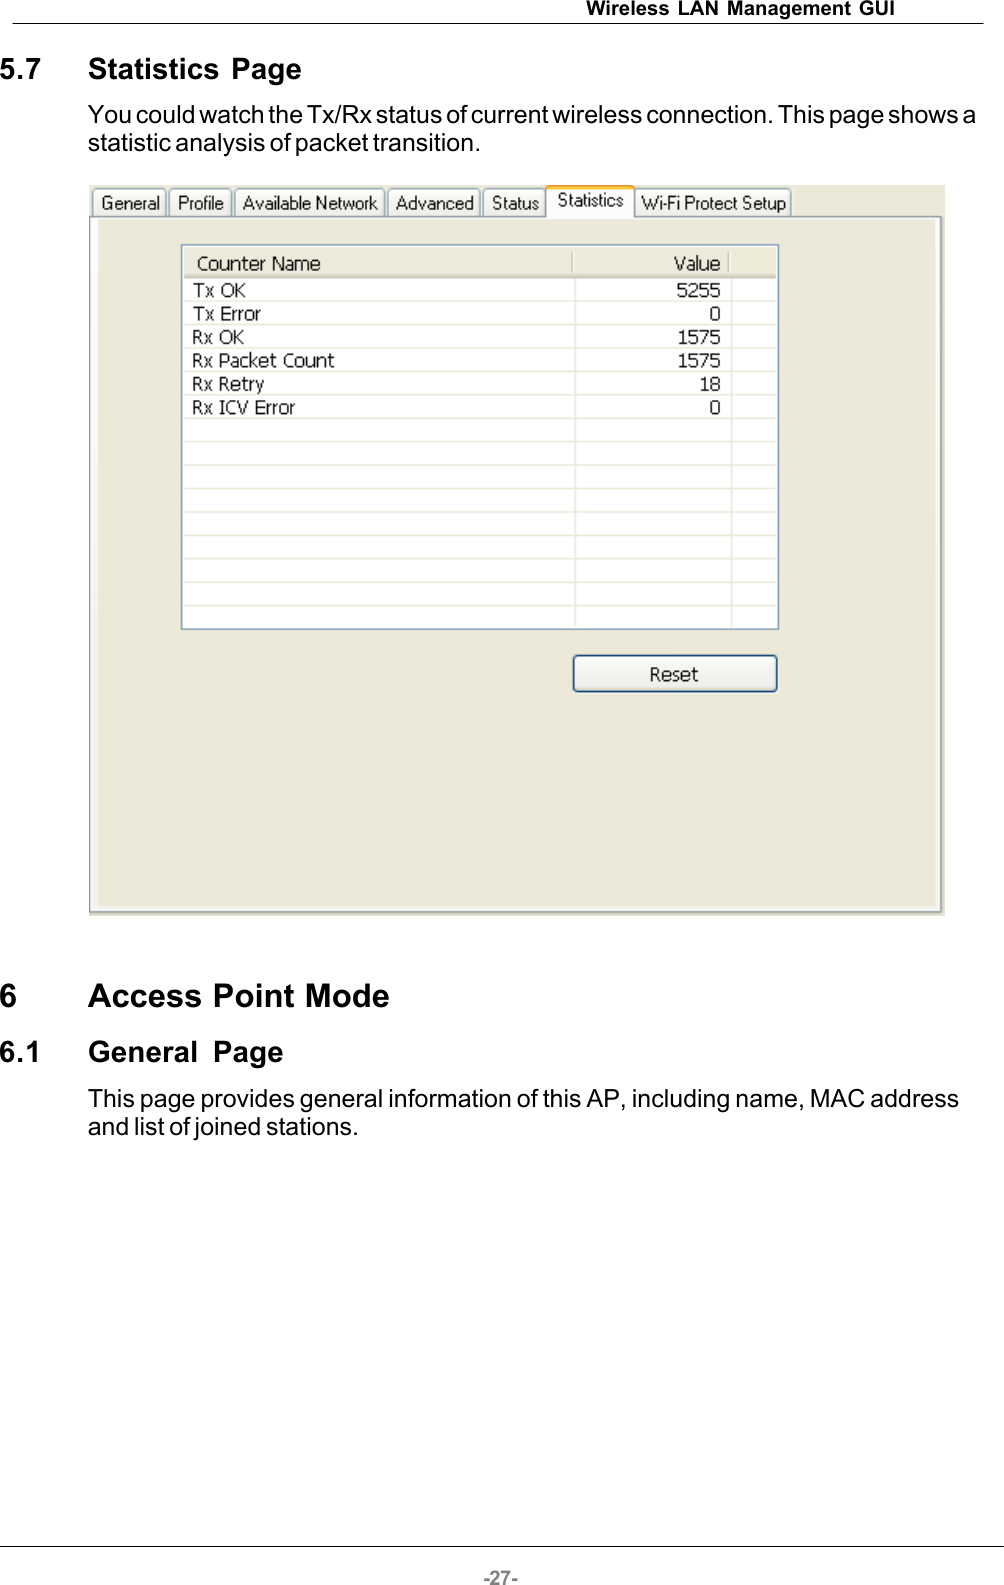 Wireless LAN Management GUI-27-5.7 Statistics PageYou could watch the Tx/Rx status of current wireless connection. This page shows astatistic analysis of packet transition.6Access Point Mode6.1 General PageThis page provides general information of this AP, including name, MAC addressand list of joined stations.